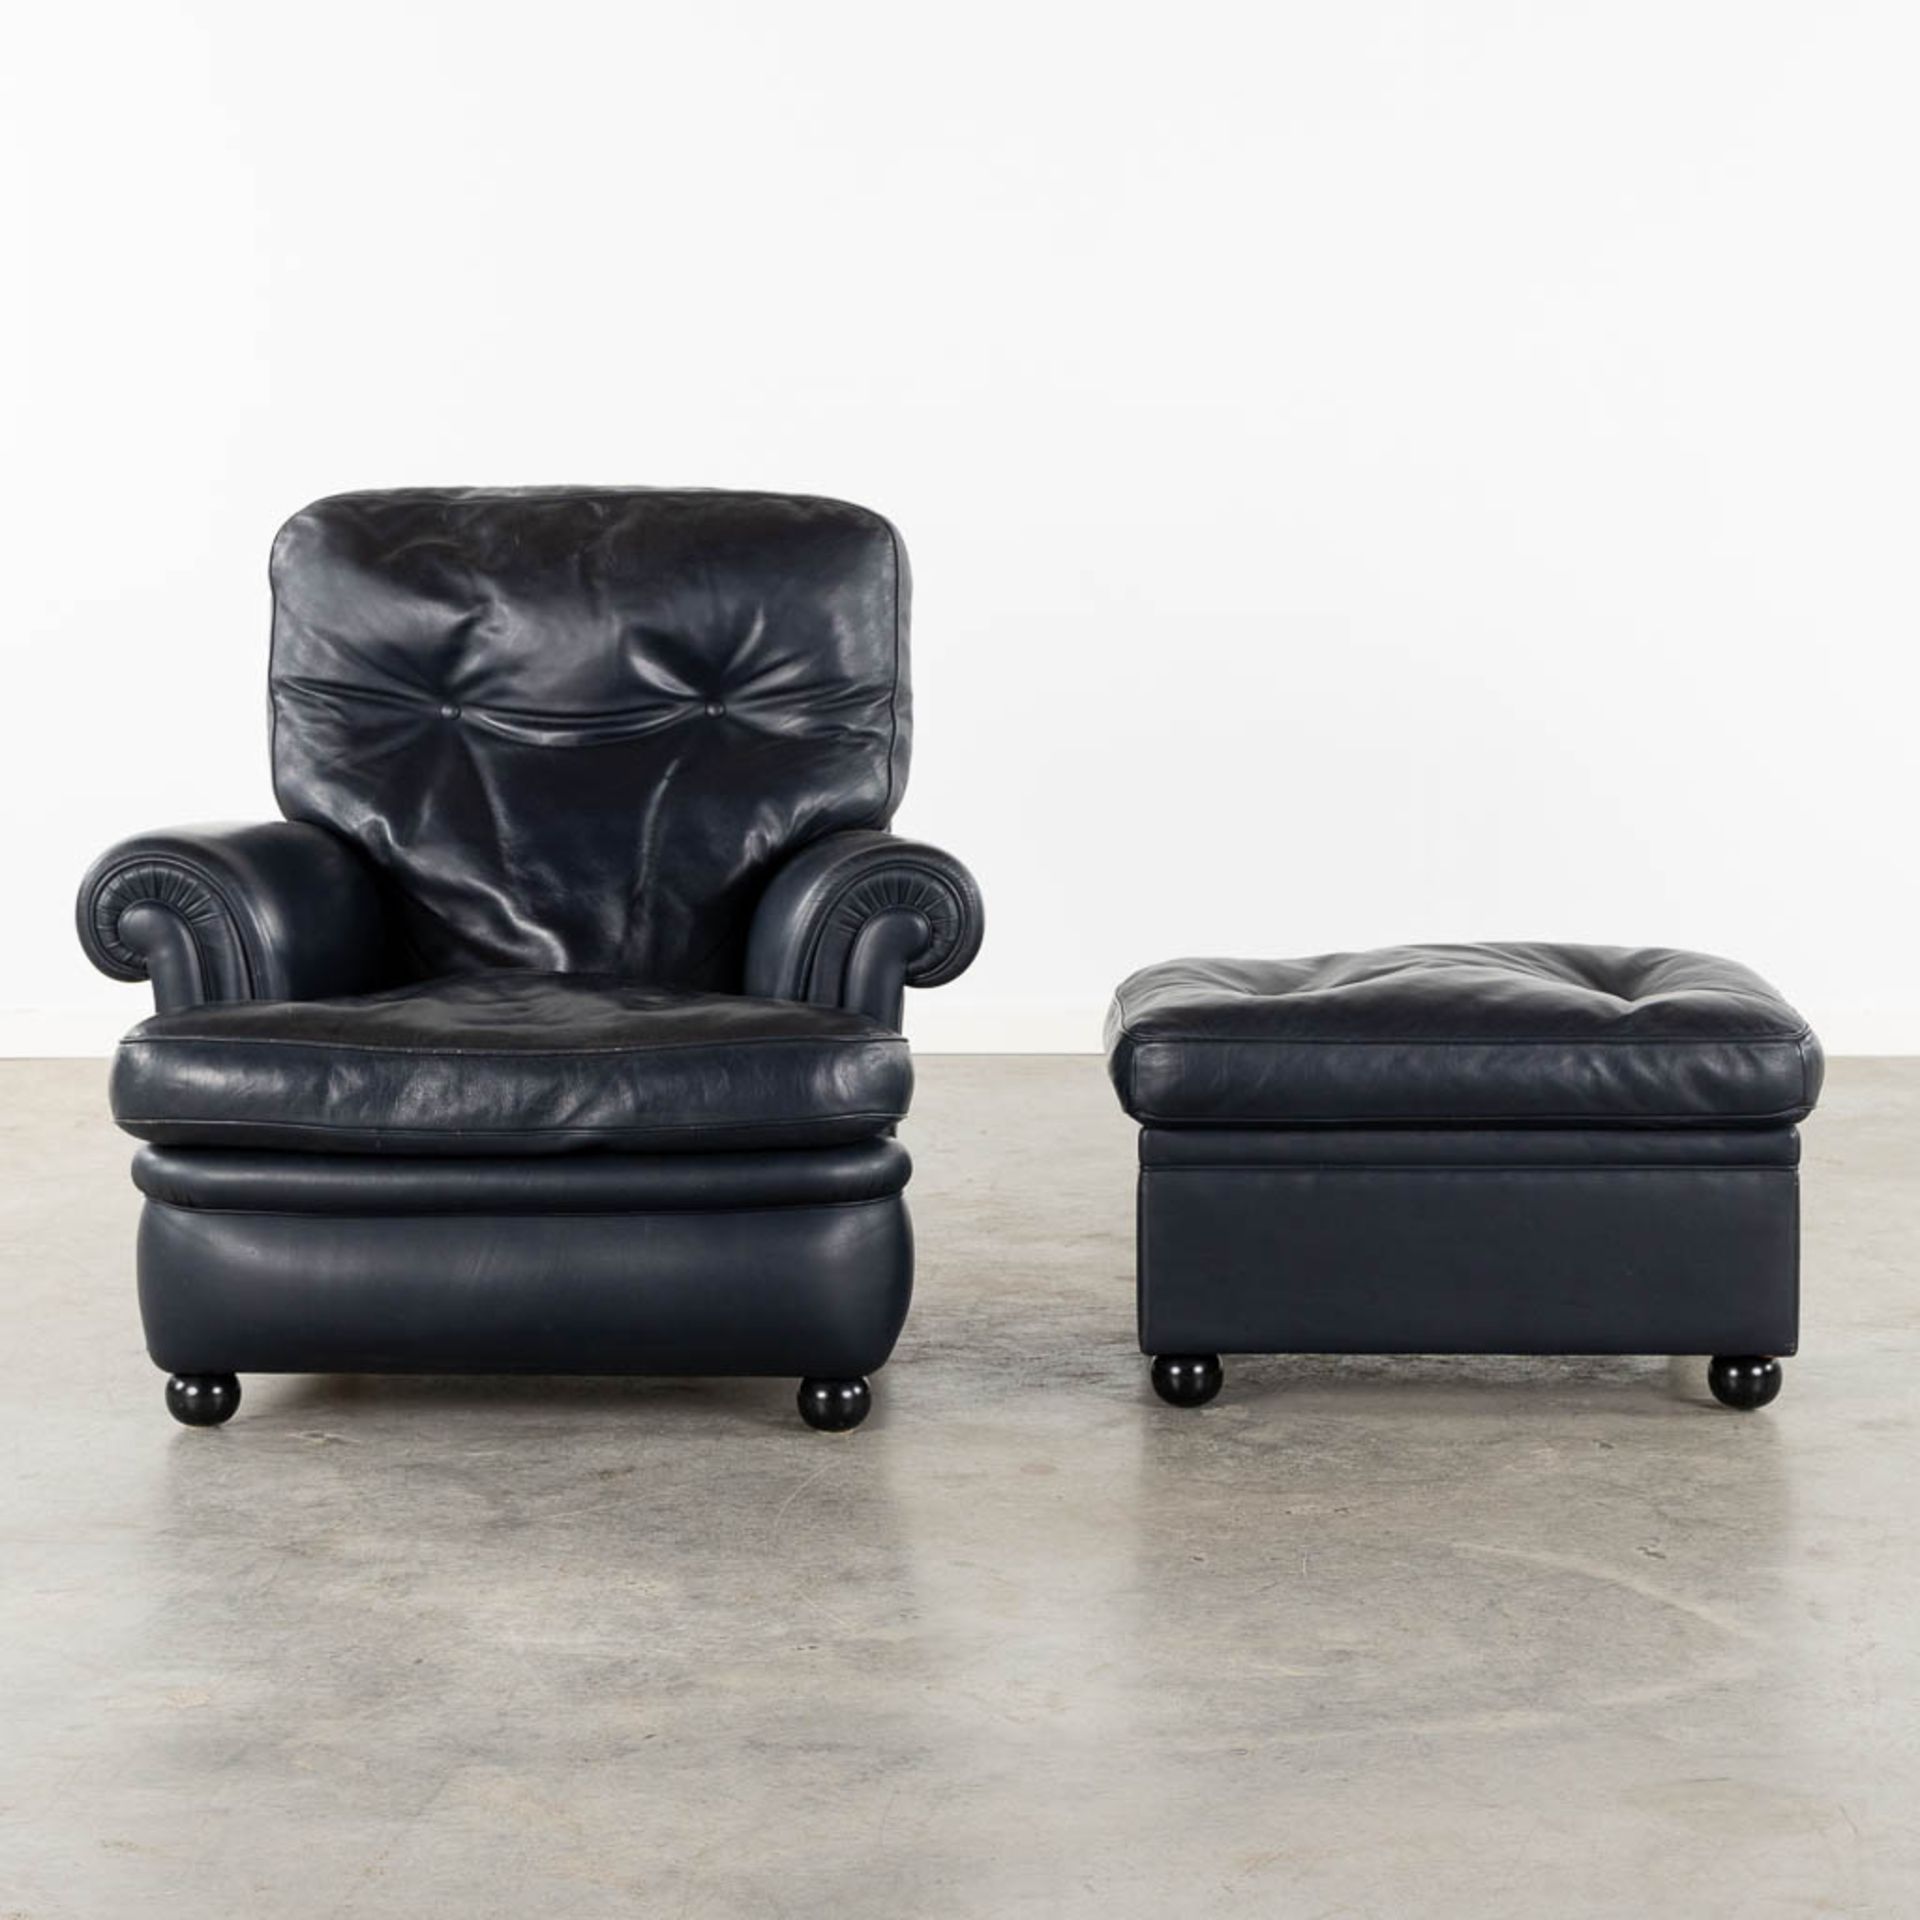 Poltrona Frau, a leather relaxing chair and matching ottoman. (L:90 x W:90 x H:88 cm) - Image 3 of 16